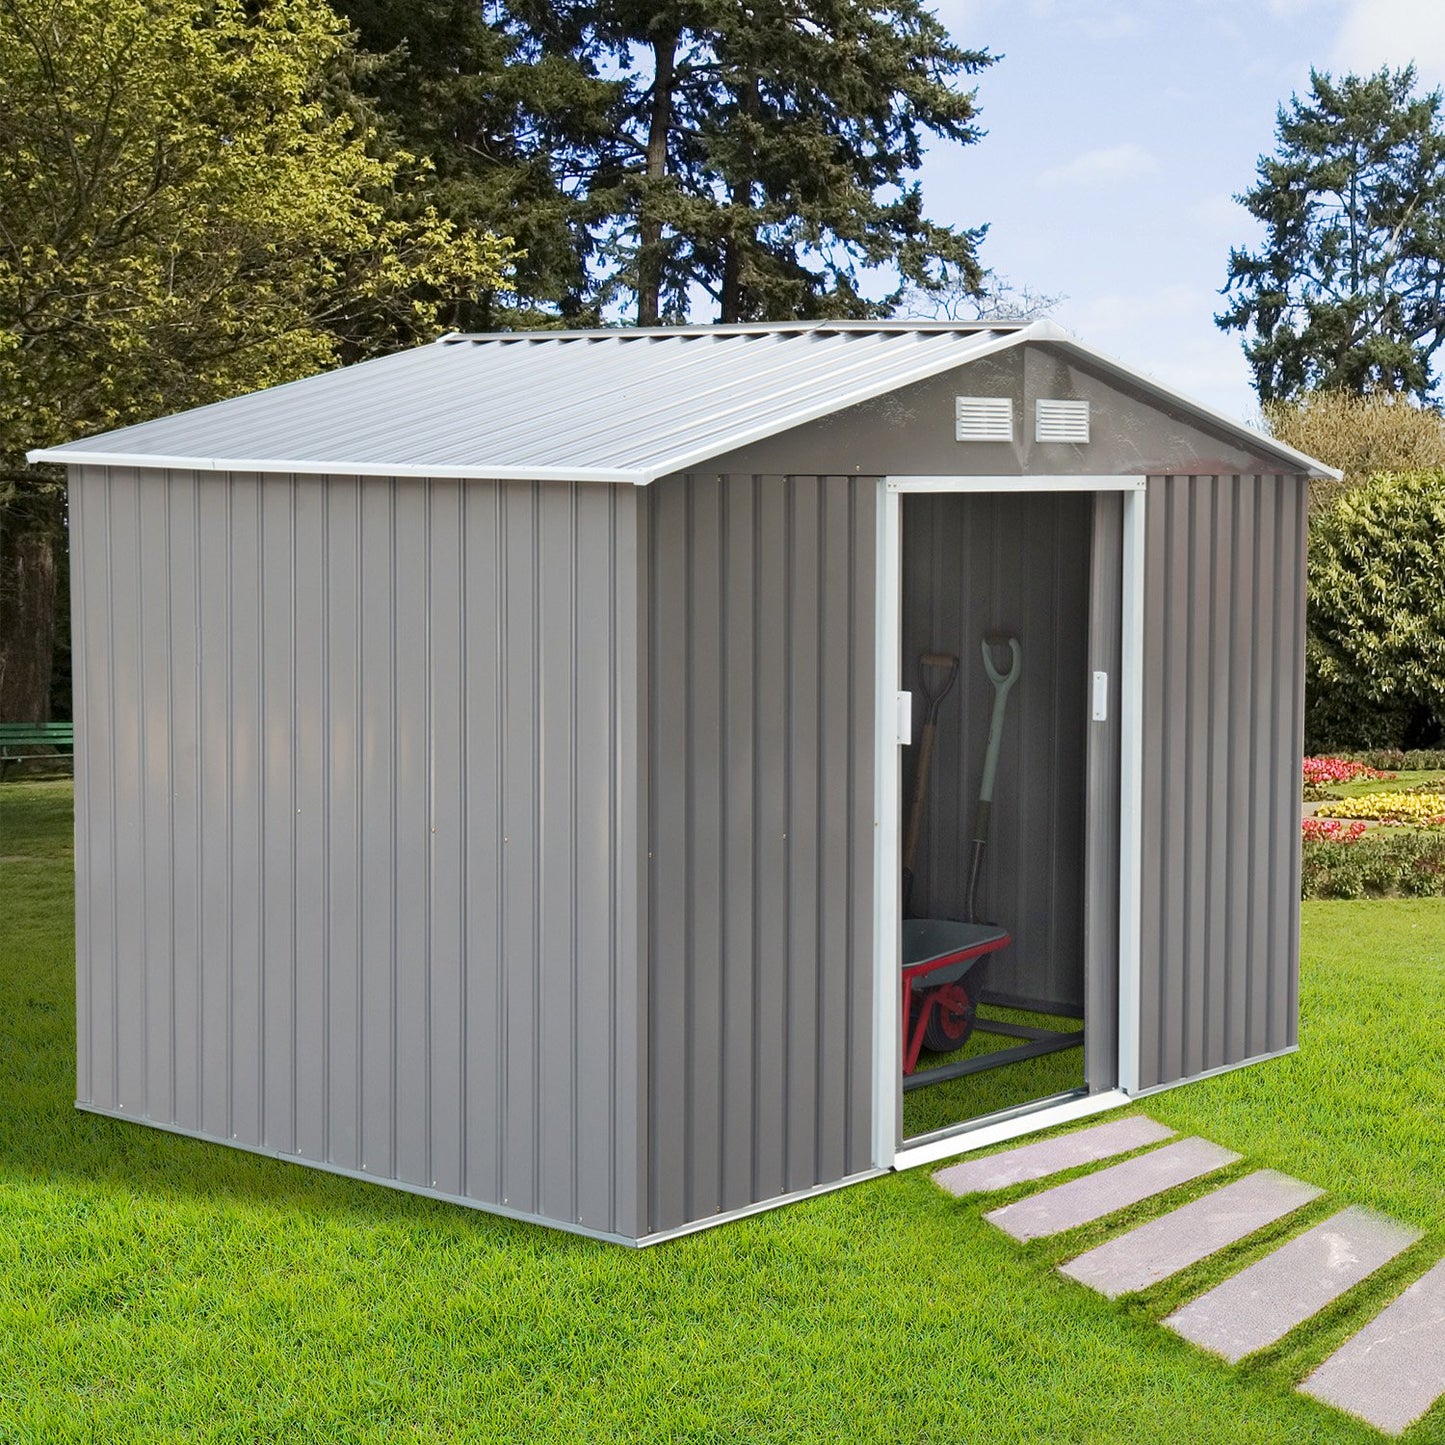 Outsunny 6.2 x 9ft Galvanized Steel Garden Shed & Foundation - Grey